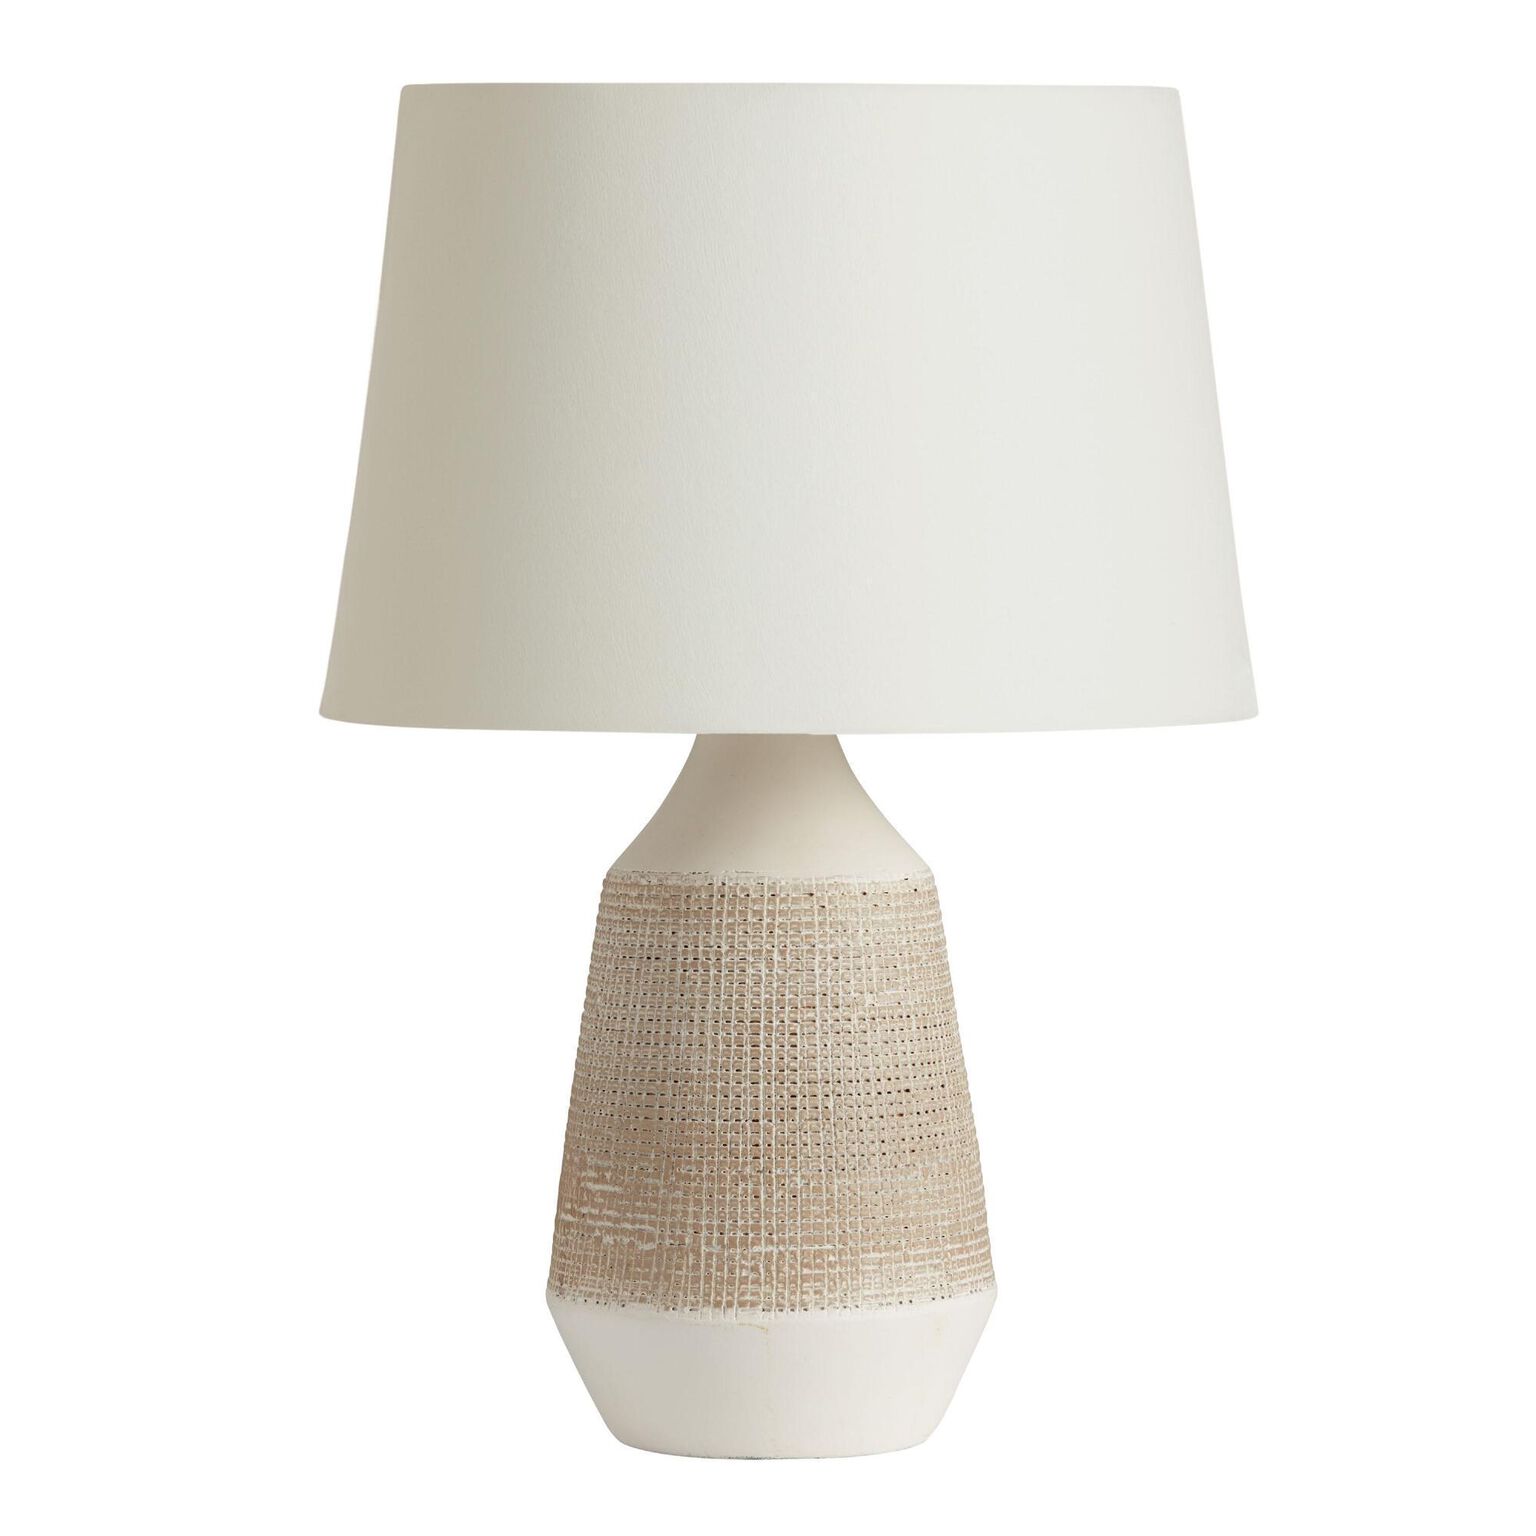 White and Gray Textured Ceramic Table Lamp Base - World Market